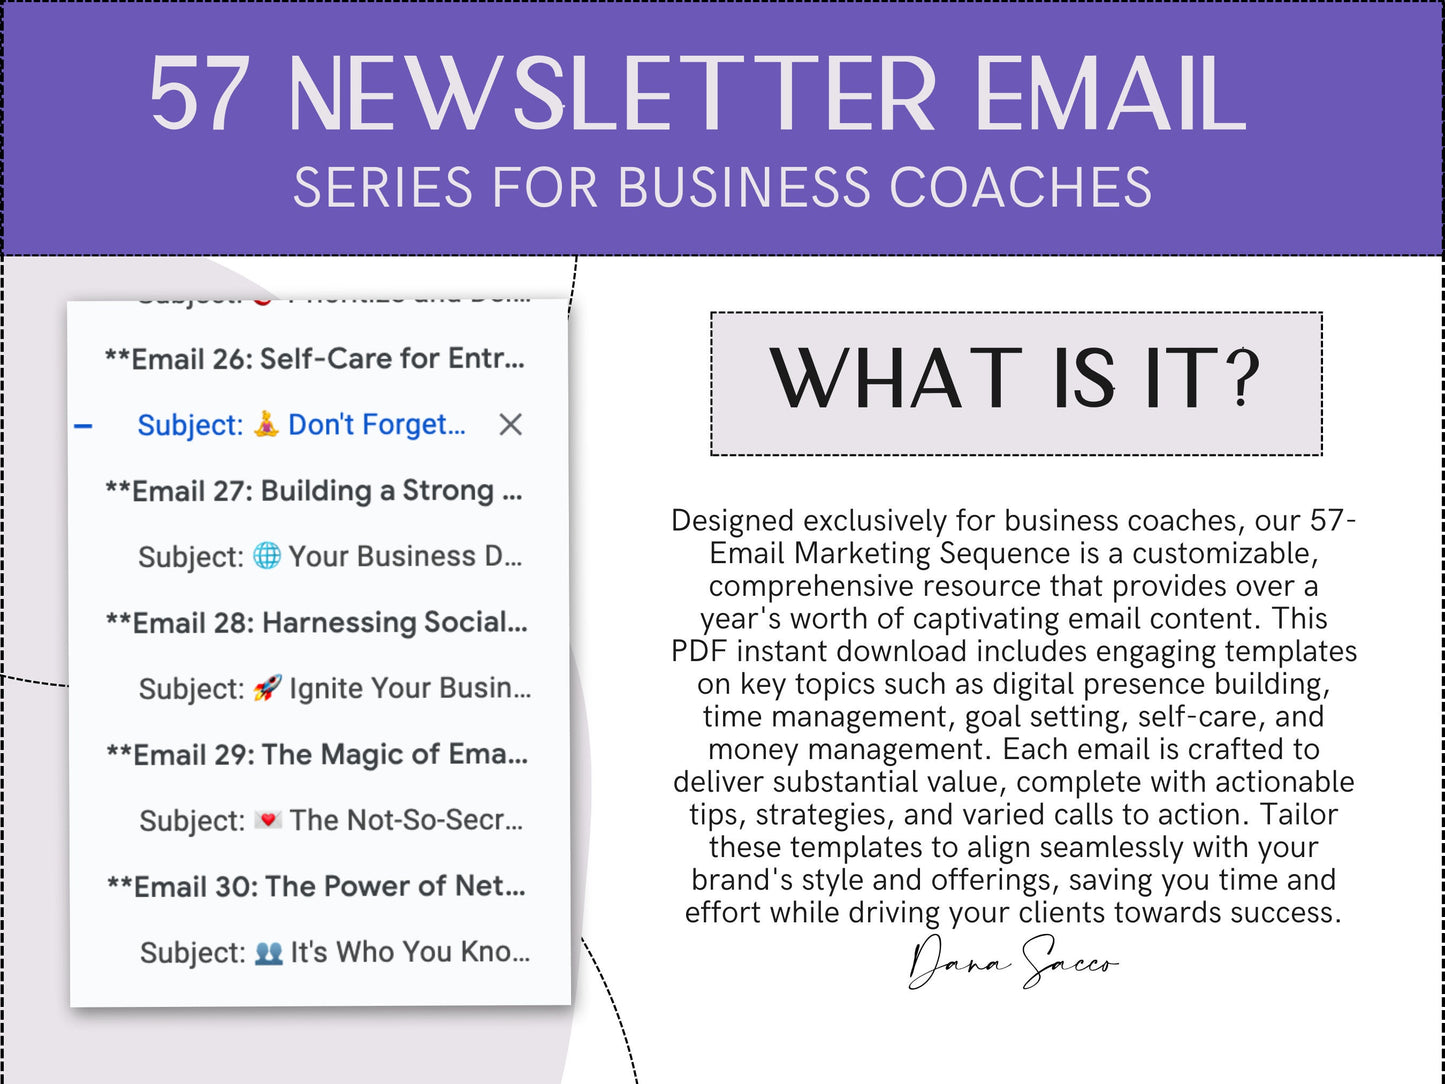 57-Email Marketing Sequence PDF: Boost Your Online Business & Business Coaching Success - Instant Download